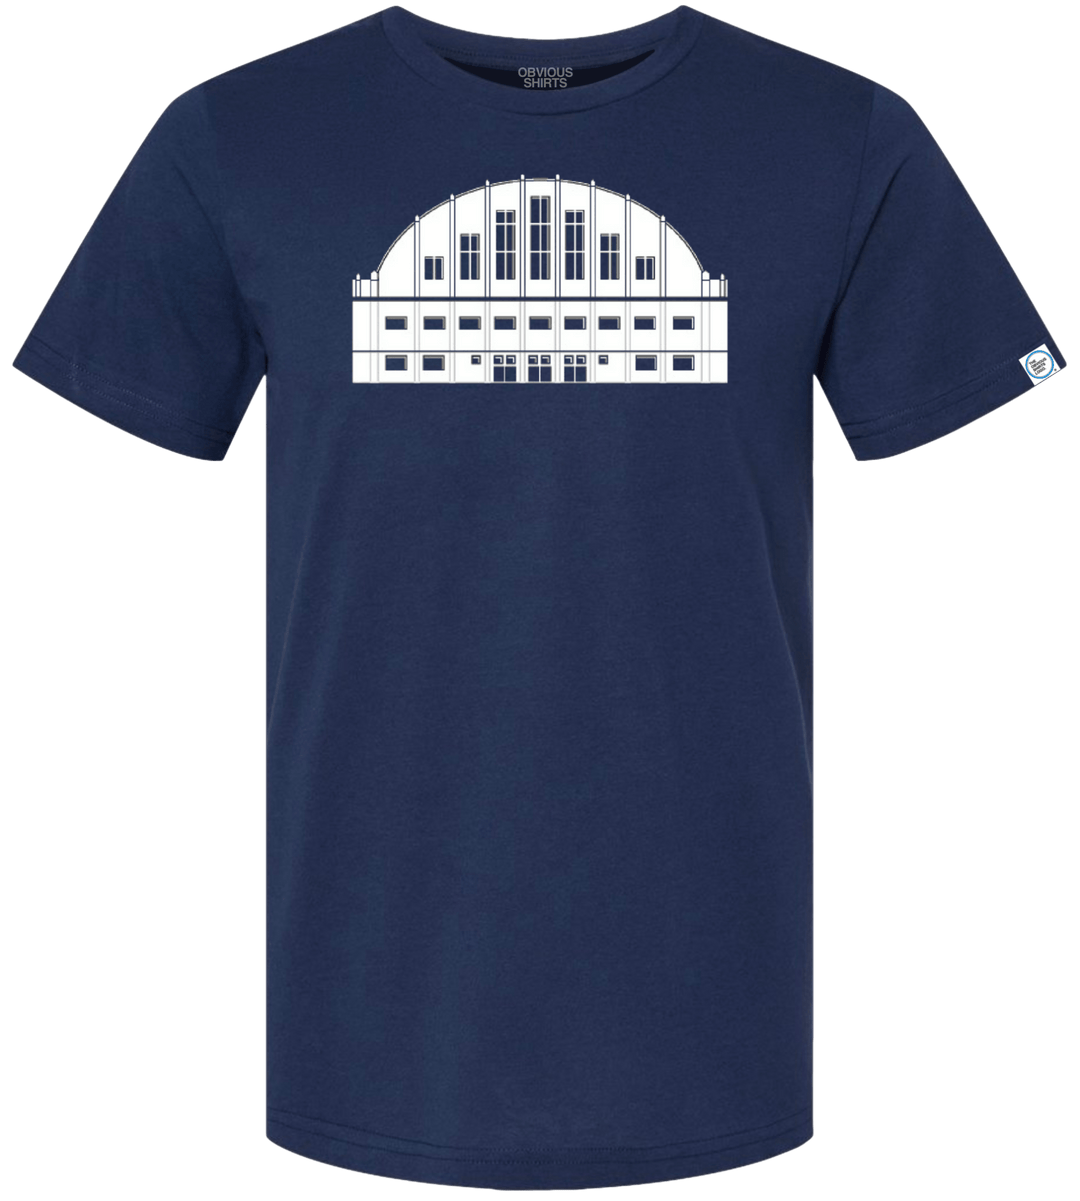 HINKLE FIELDHOUSE. - OBVIOUS SHIRTS